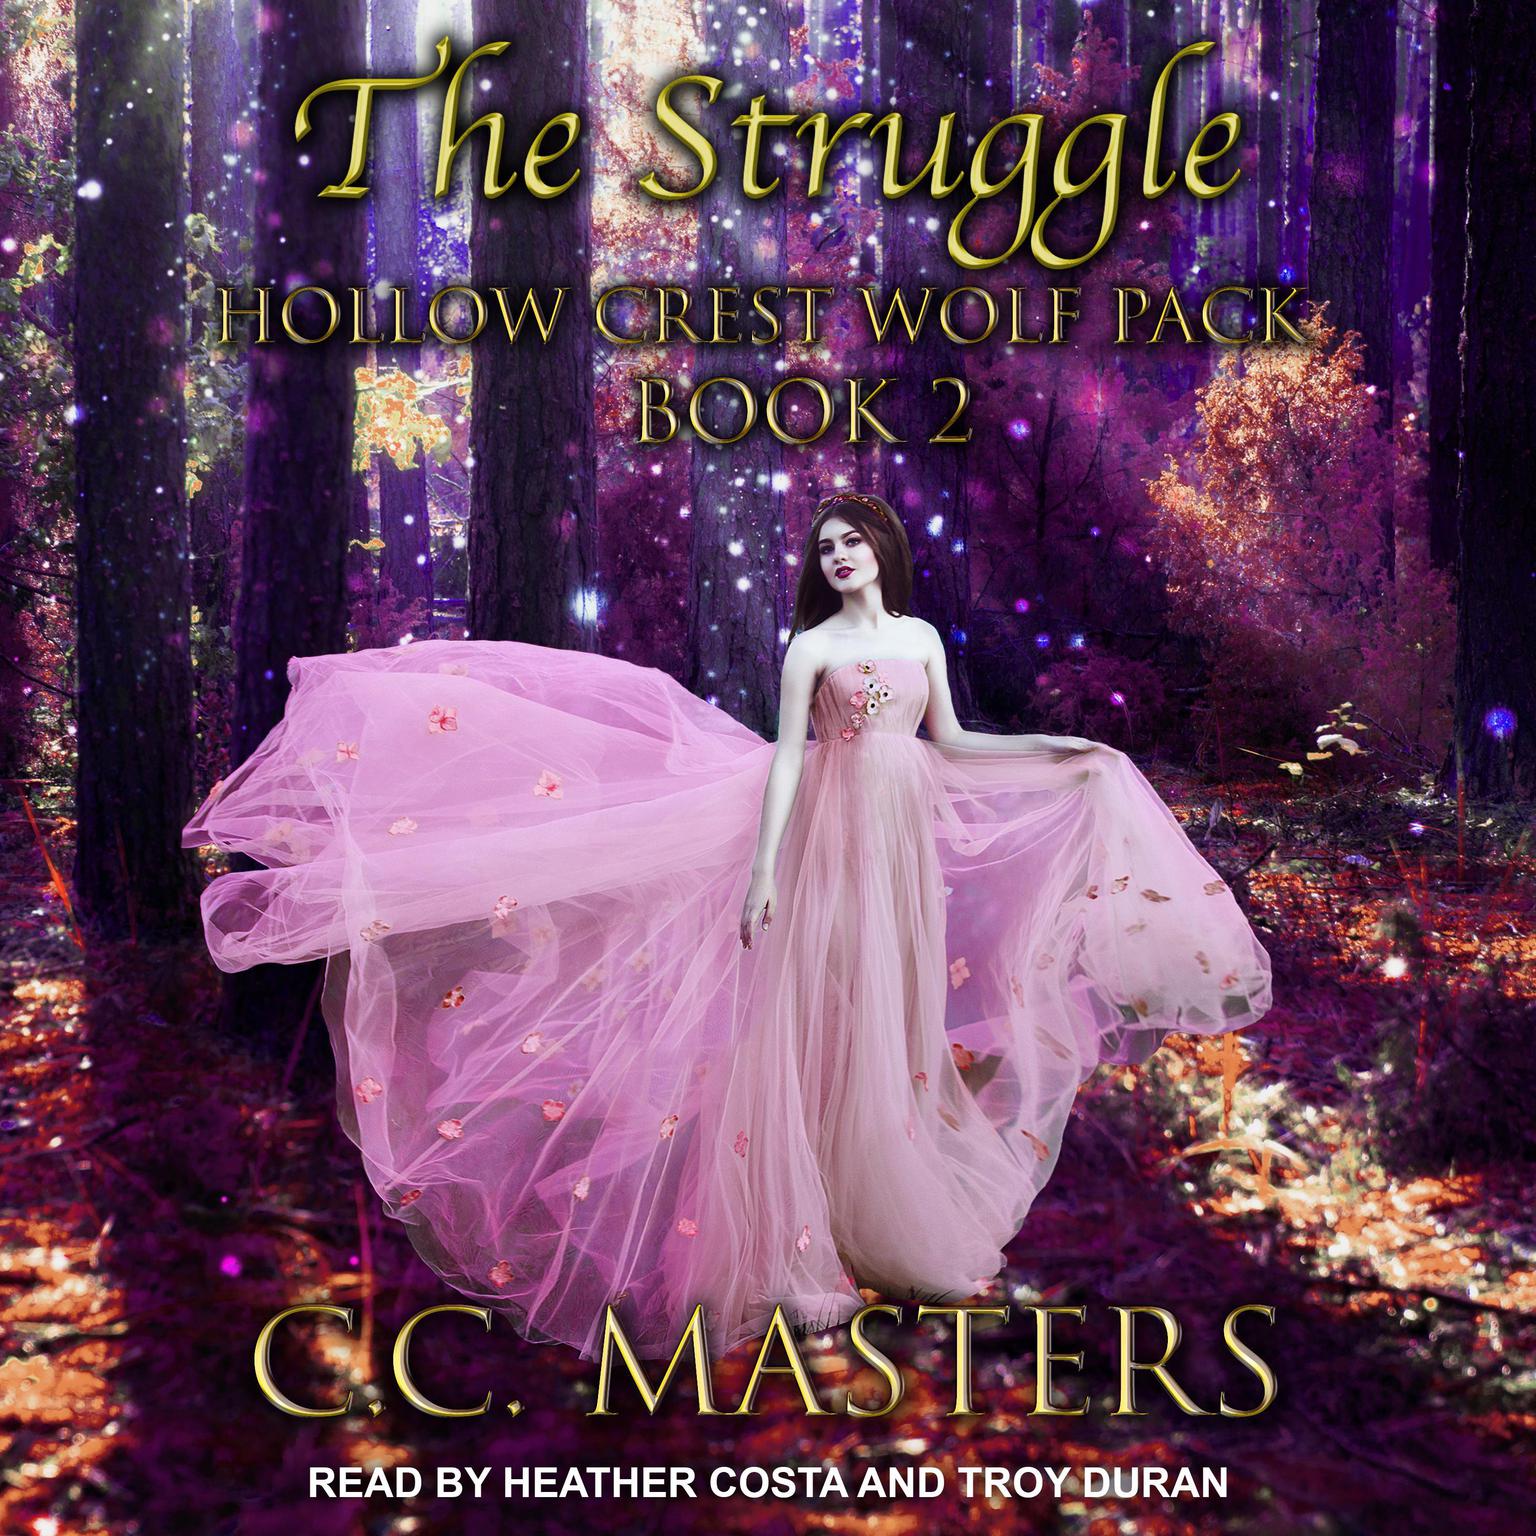 The Struggle: Hollow Crest Wolf Pack Book 2 Audiobook, by C.C. Masters